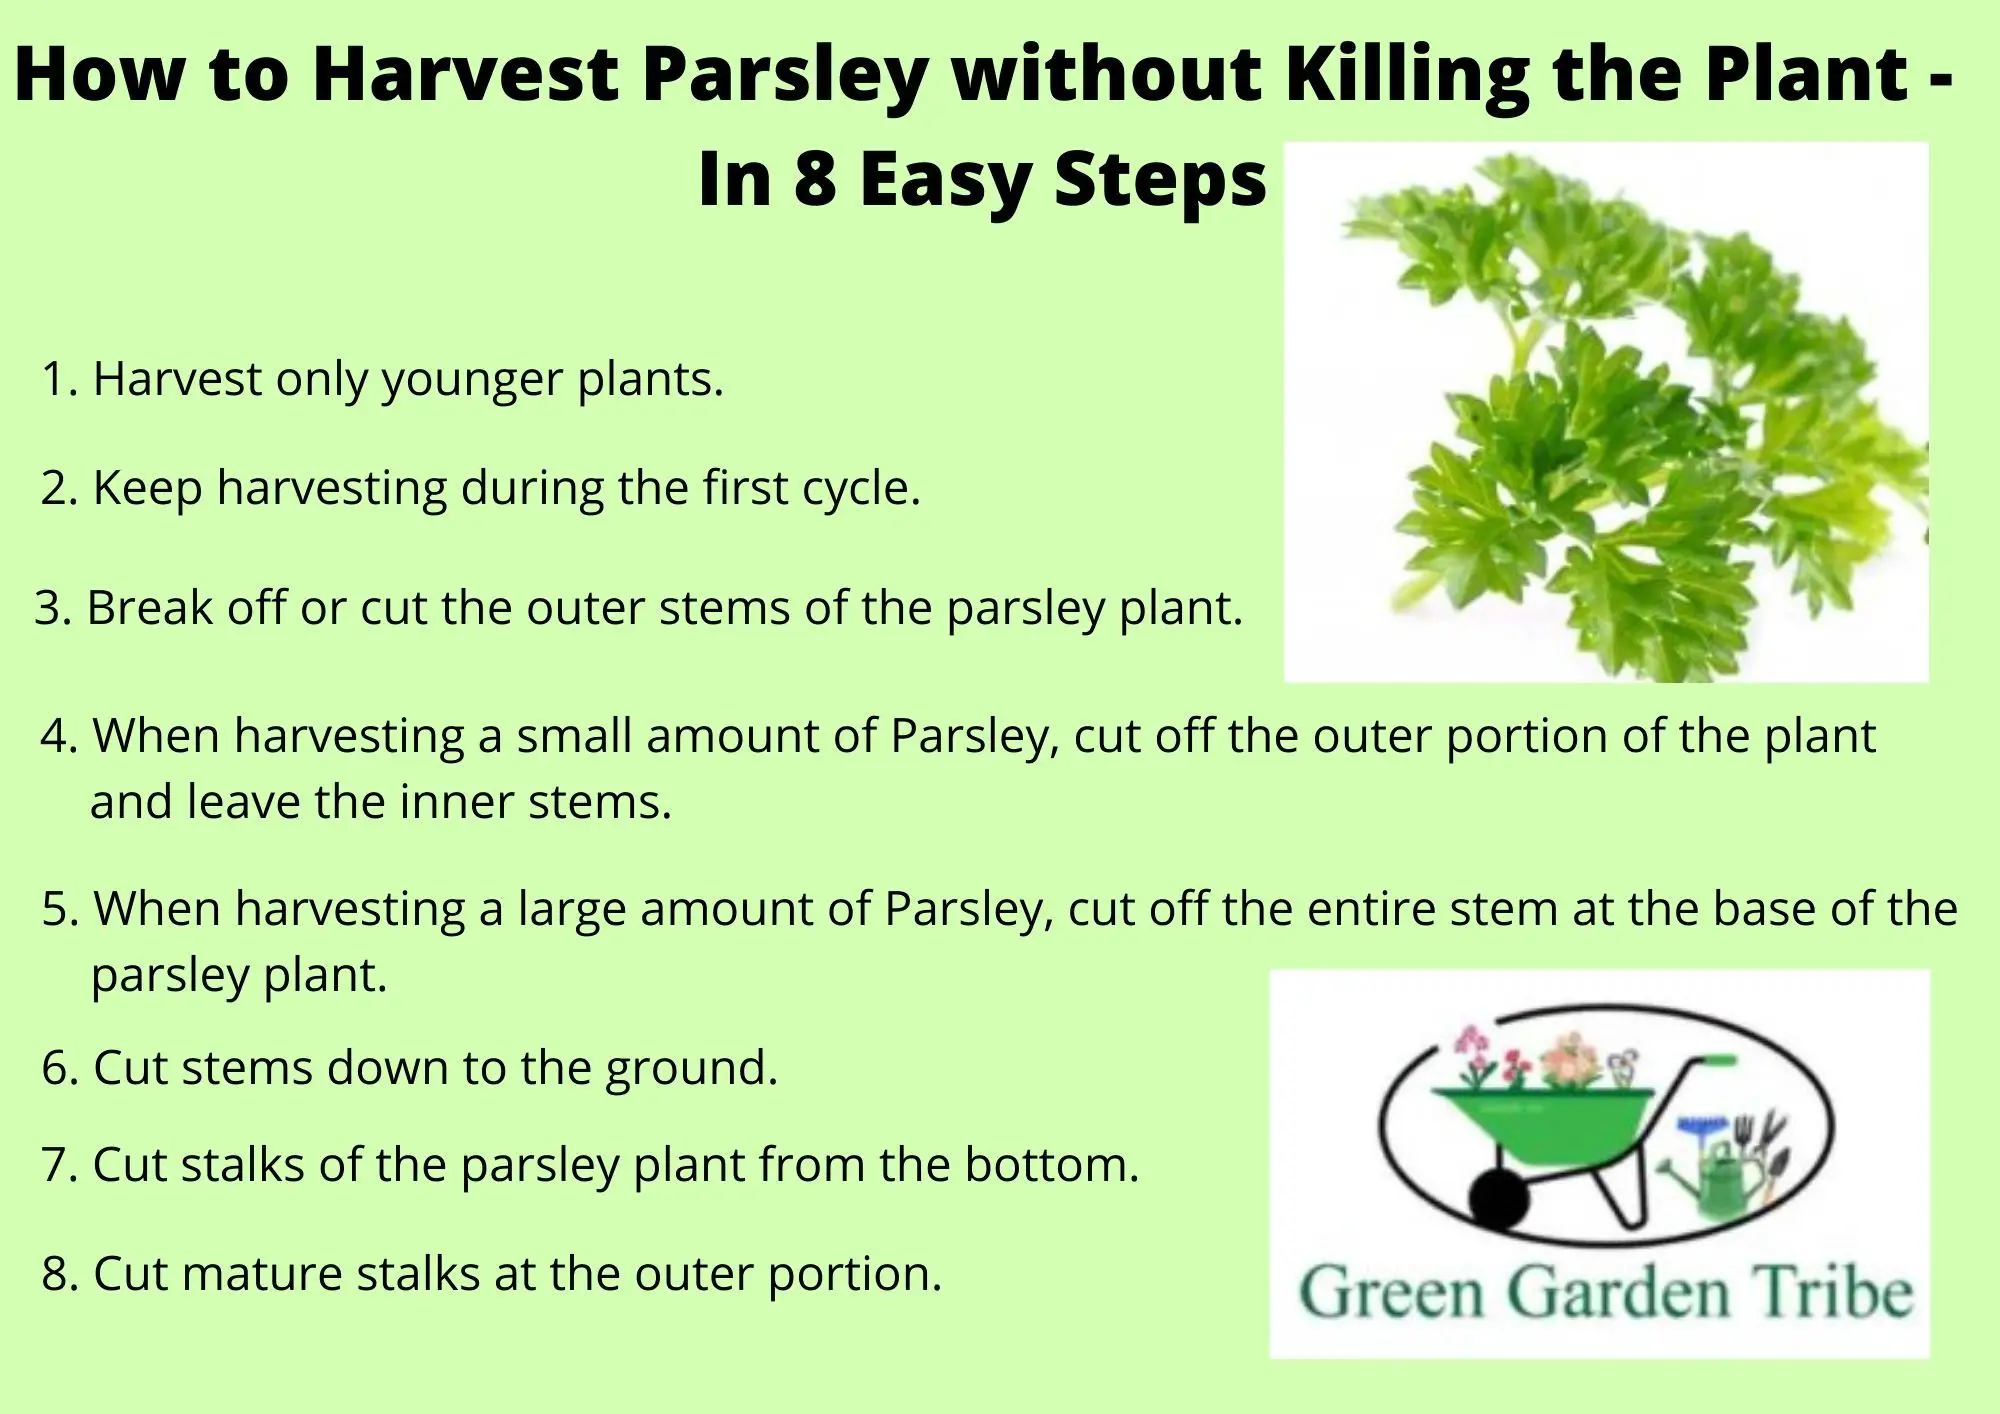 How to Harvest Parsley without Killing the Plant - In 8 Easy Steps